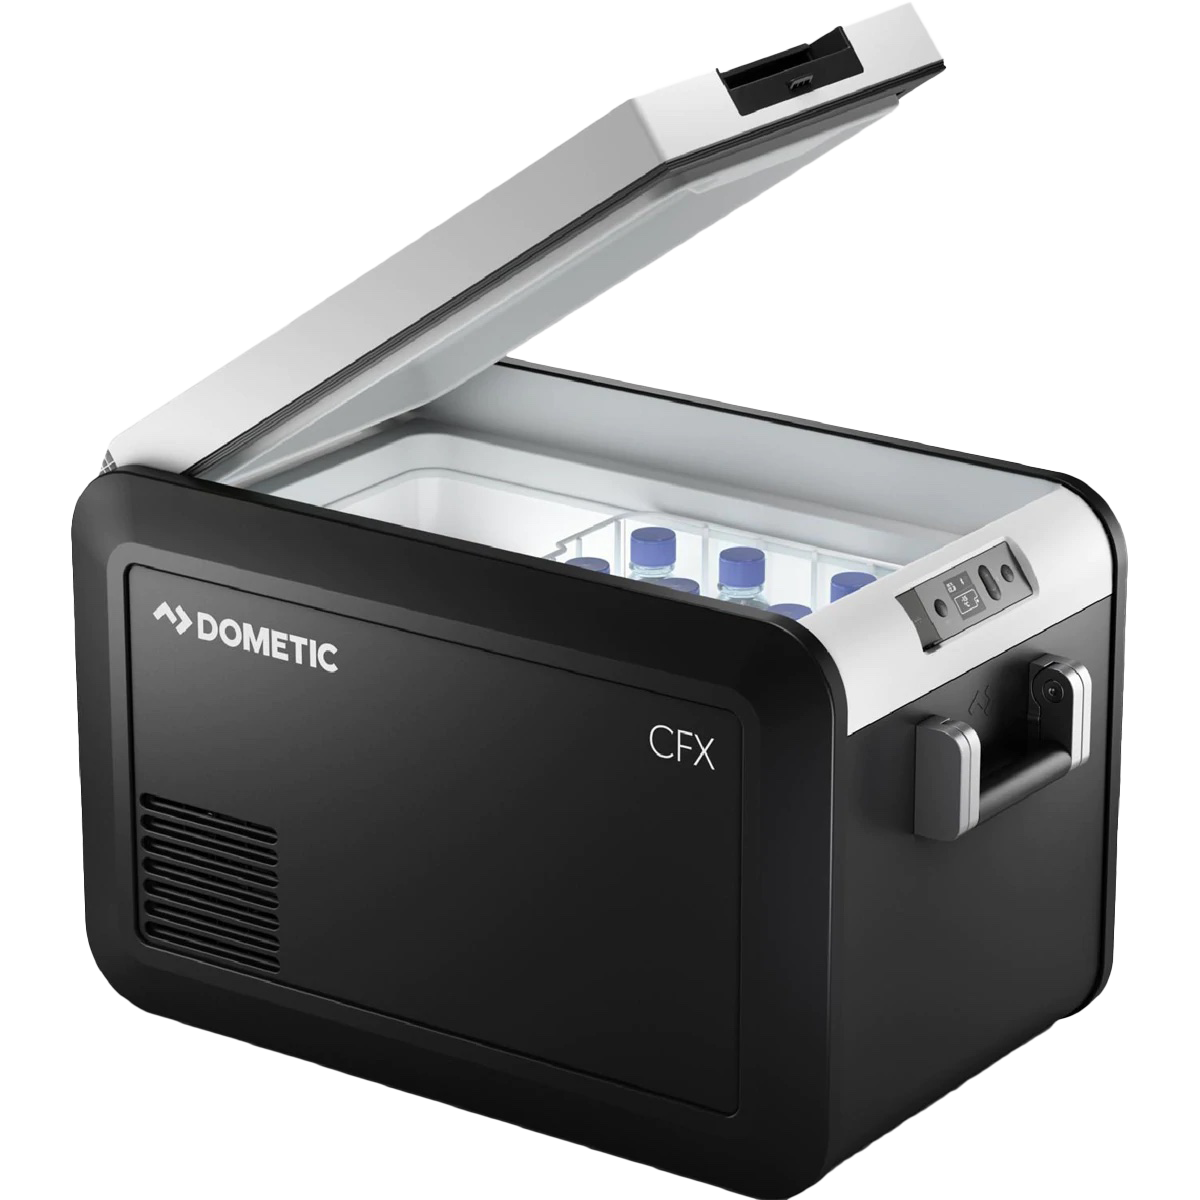 Dometic CFX3 35 Powered Cooler alternate view